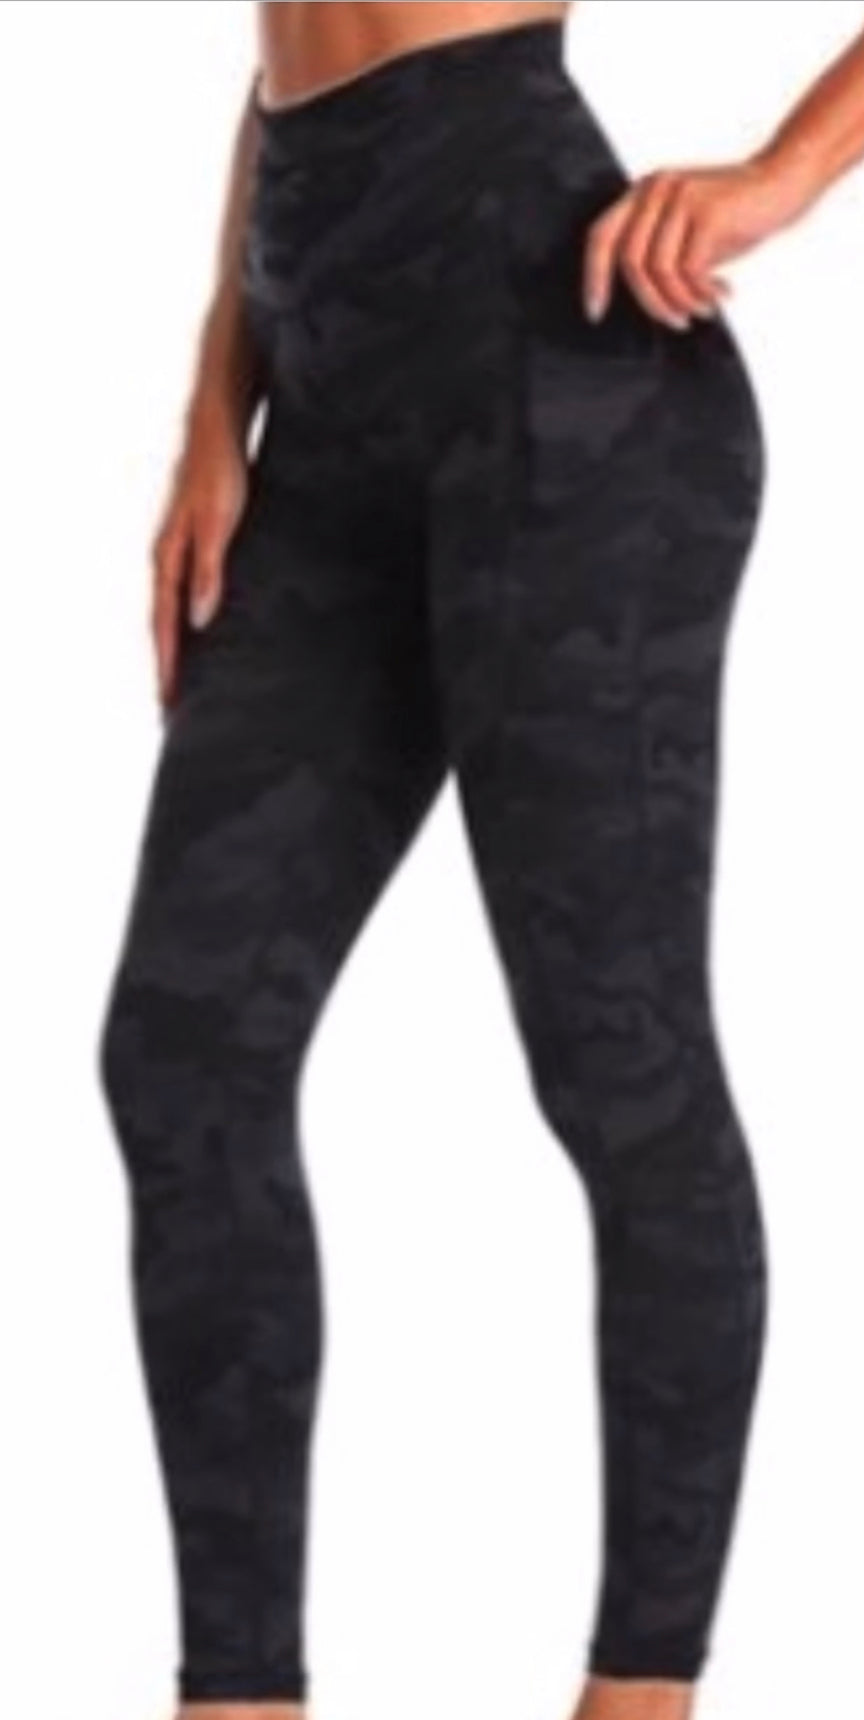 Fit Review Colorfulkoala Women's High Waisted Leggings in Camo